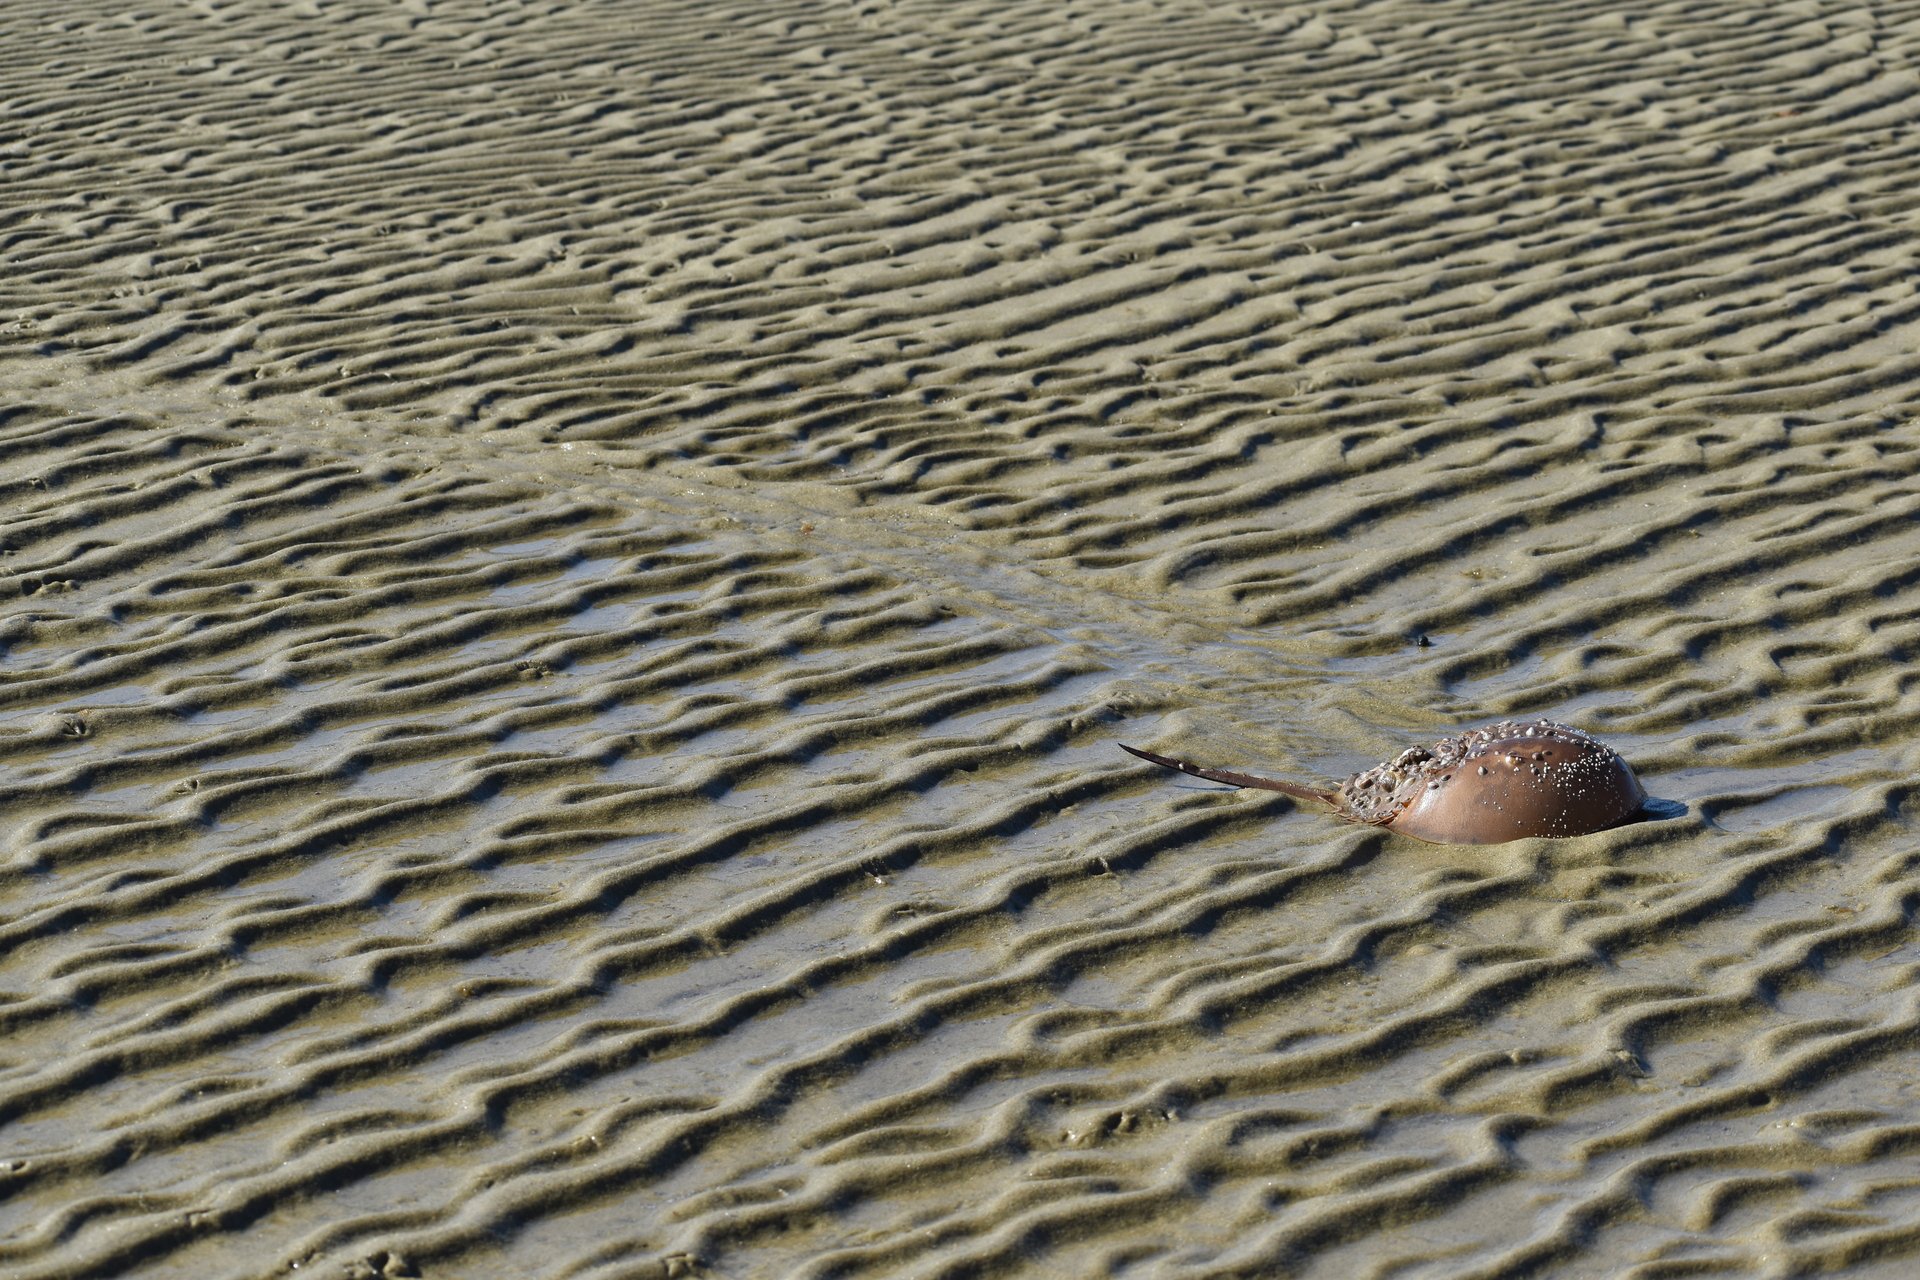 Horseshoe crab leaving a trail on wet sand